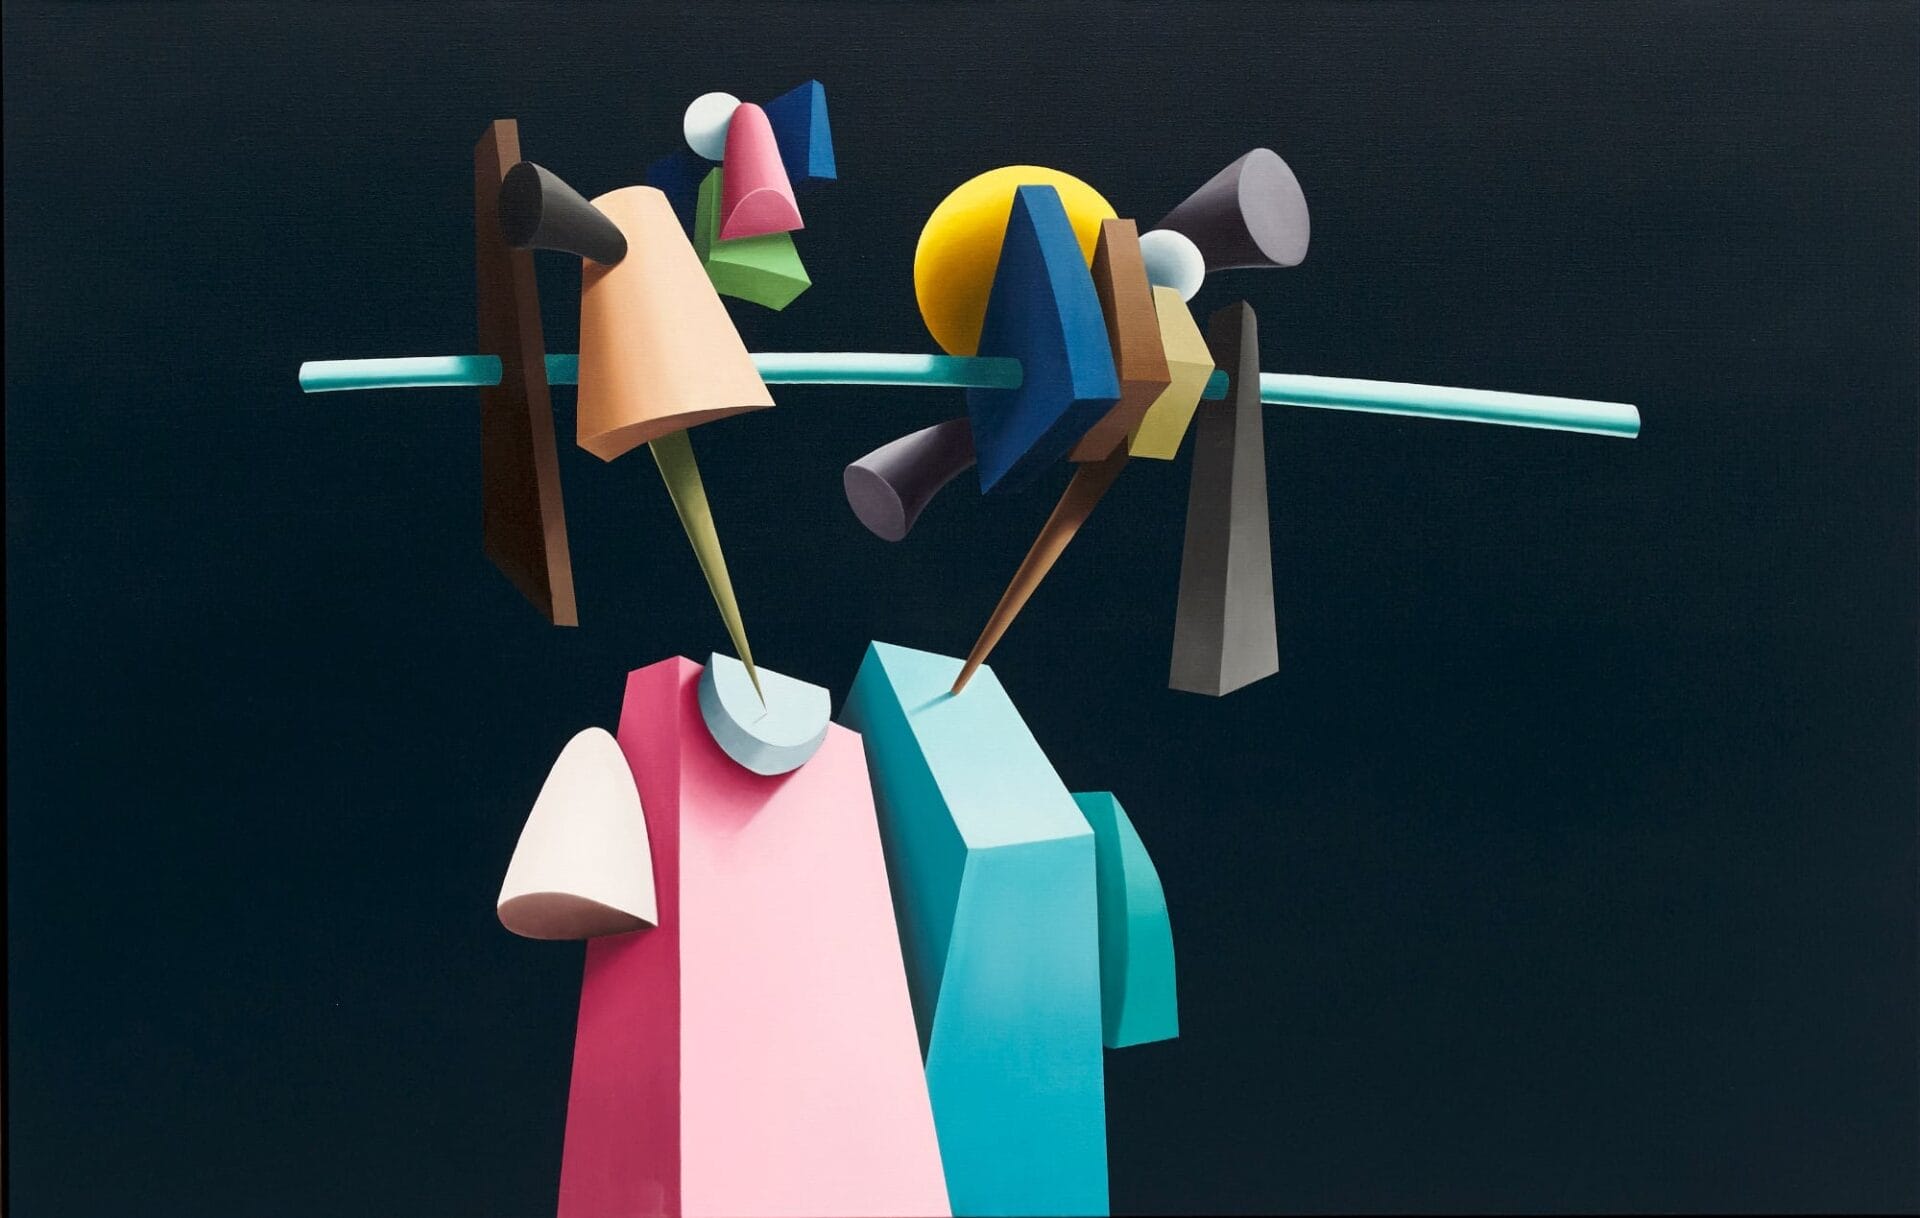 an abstract portrait of two figures painted chunky, colorful shapes. one wears pink and the other blue and a bar runs through their heads